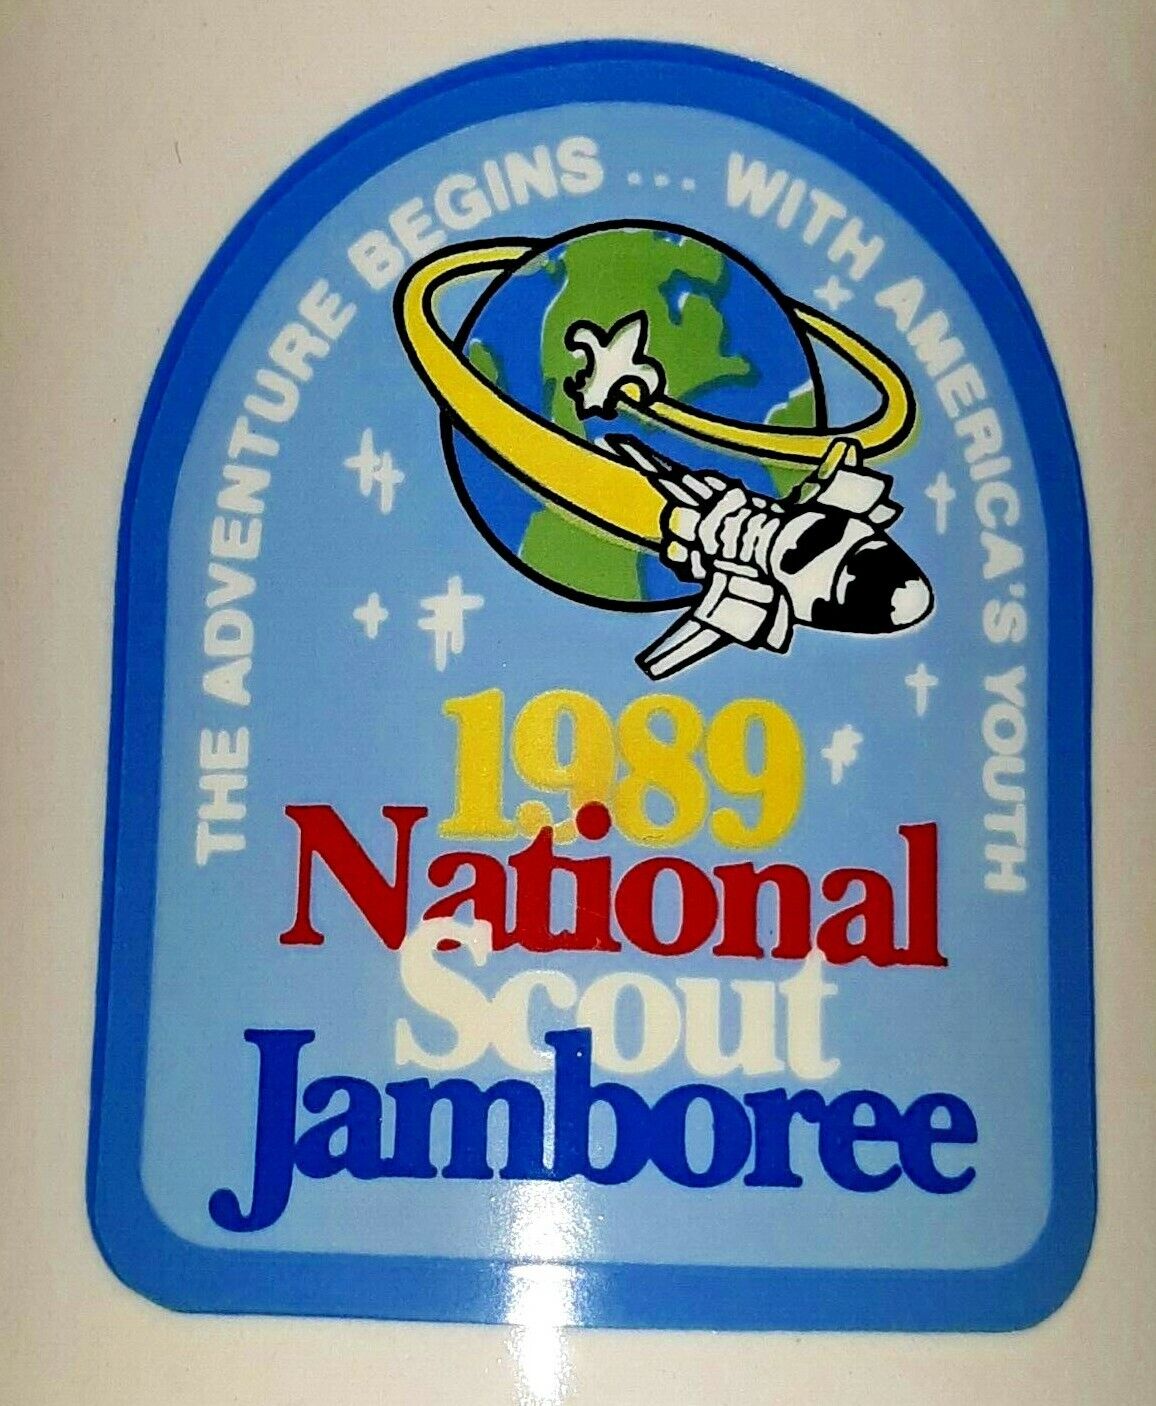 Vintage 1989 National Scout Jamboree boy scout coffee mug  pre-owned